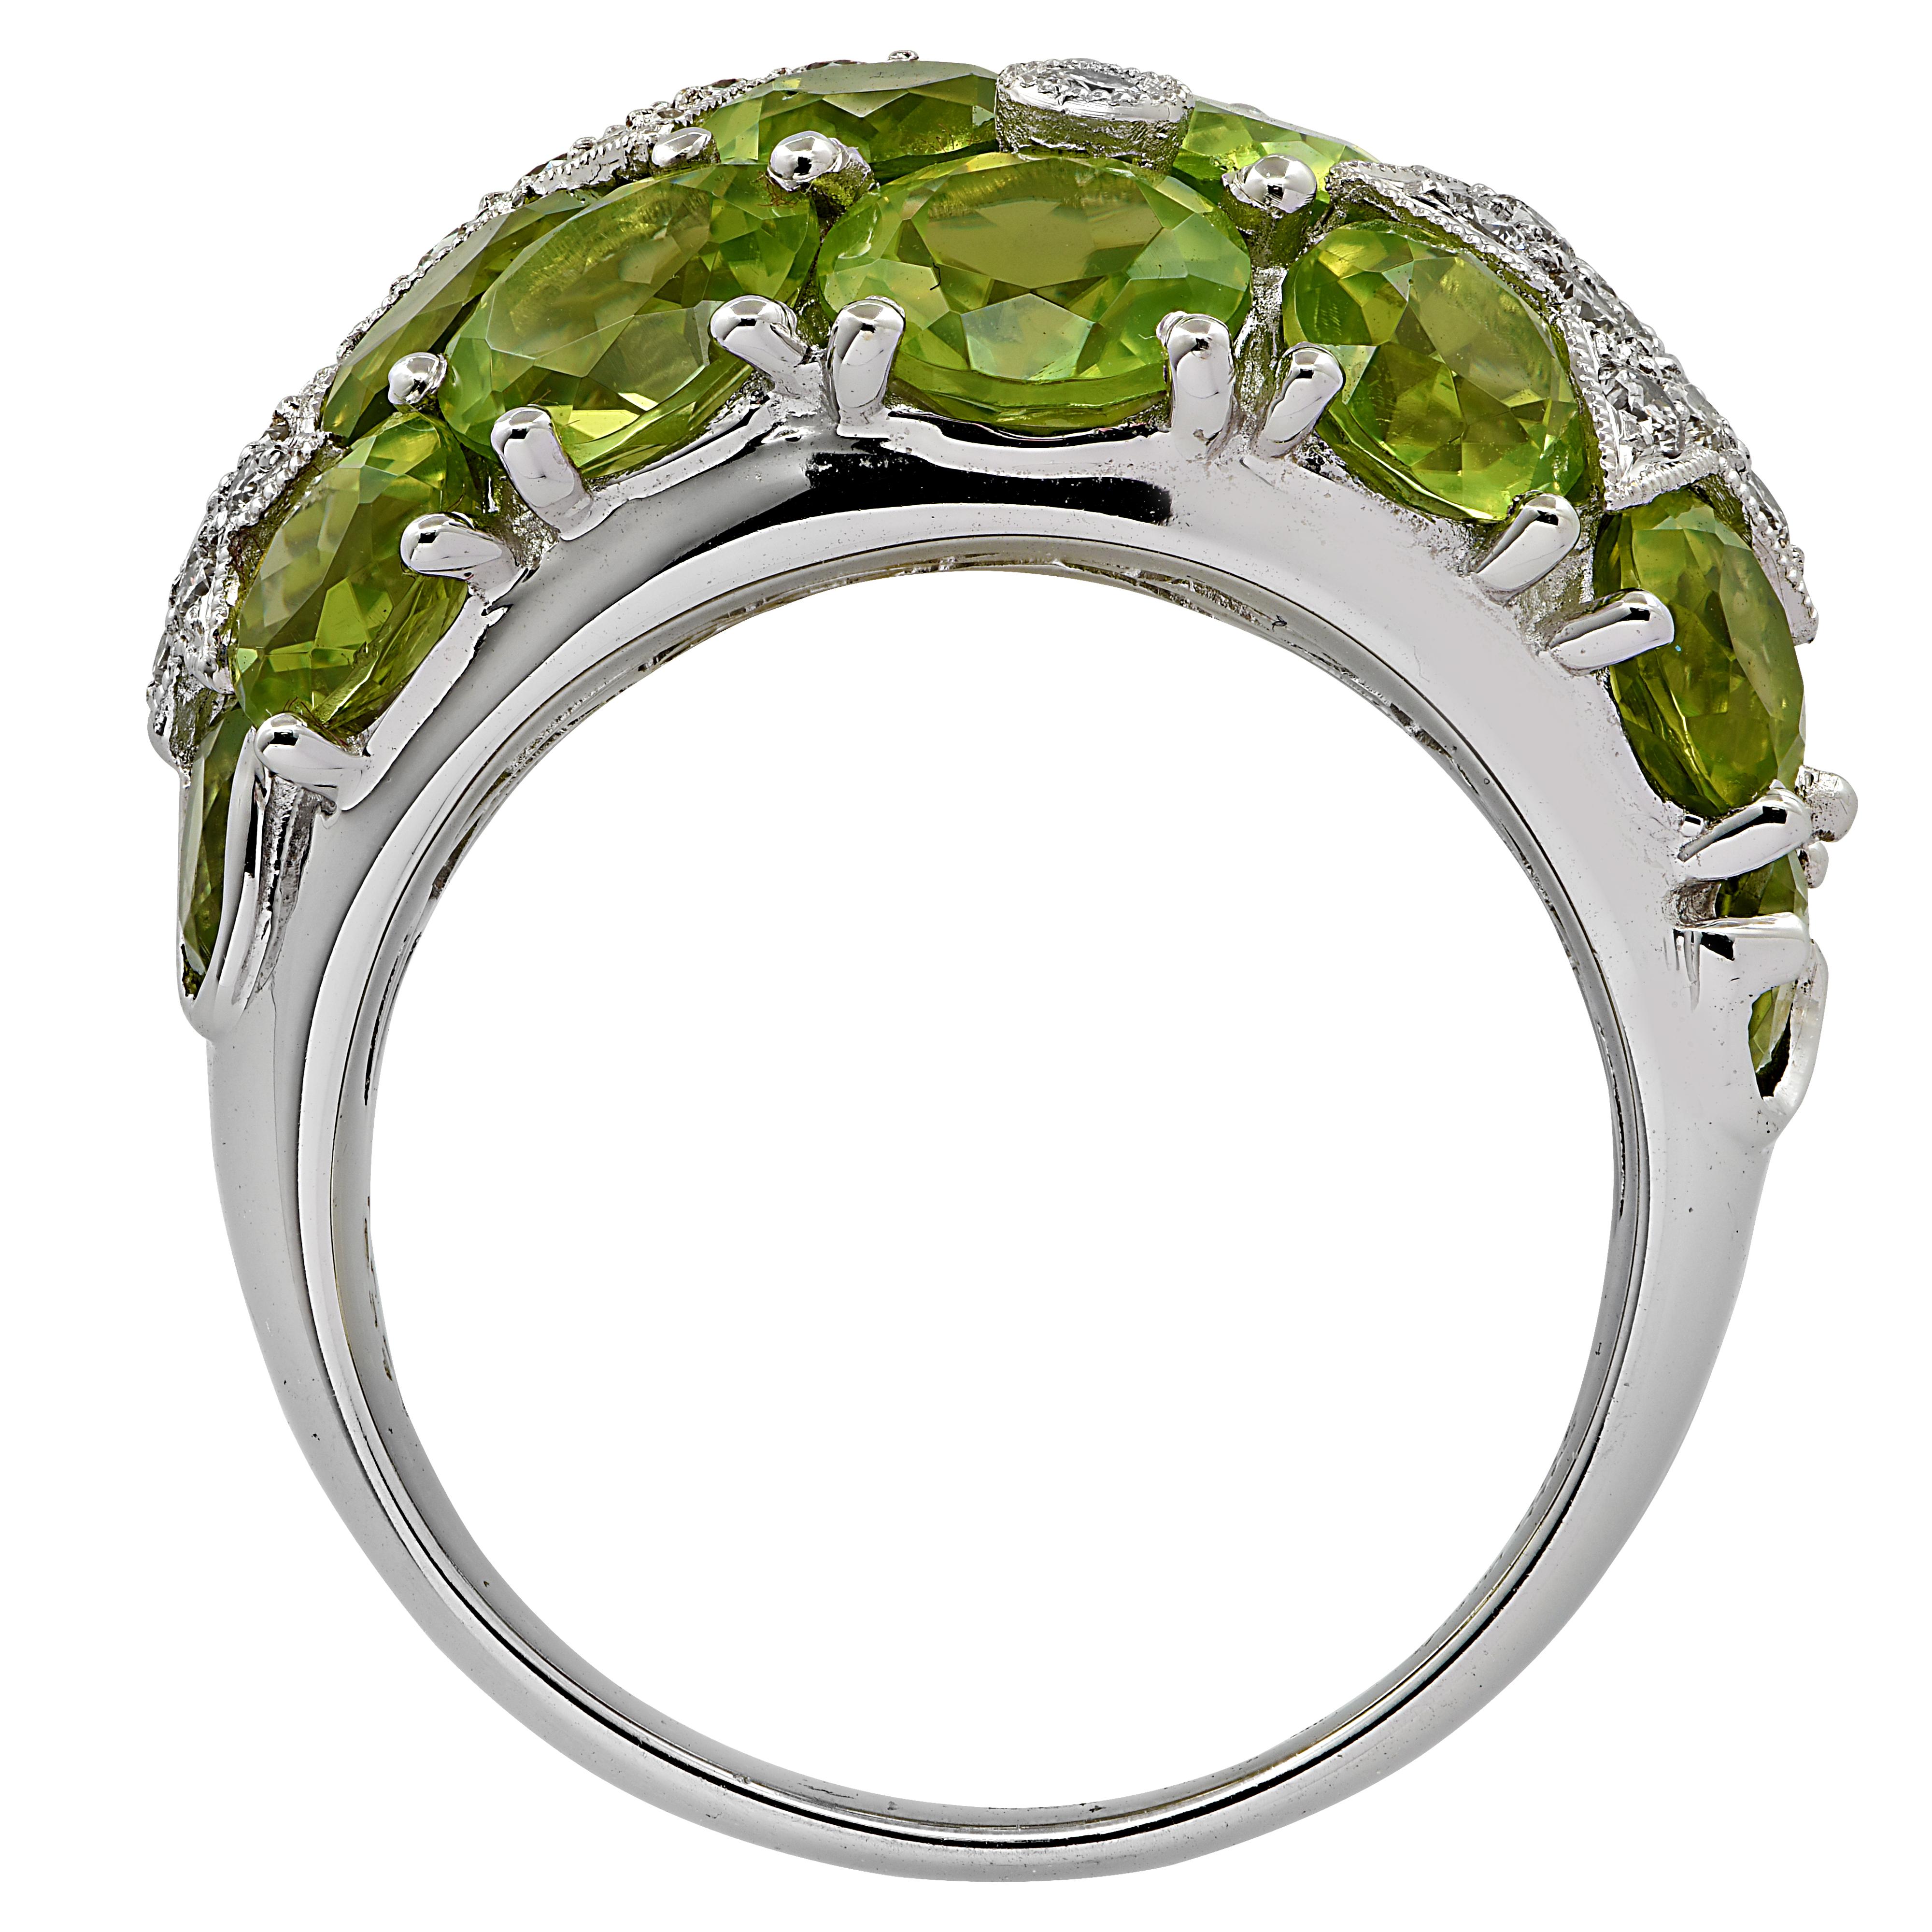 Enchanting ring crafted in 18 karat white gold featuring round brilliant cut diamonds weighing approximately .51 carats G color SI clarity, arranged in diamond encrusted stars, resting on a bed of oval shaped peridots. This delightful ring measures